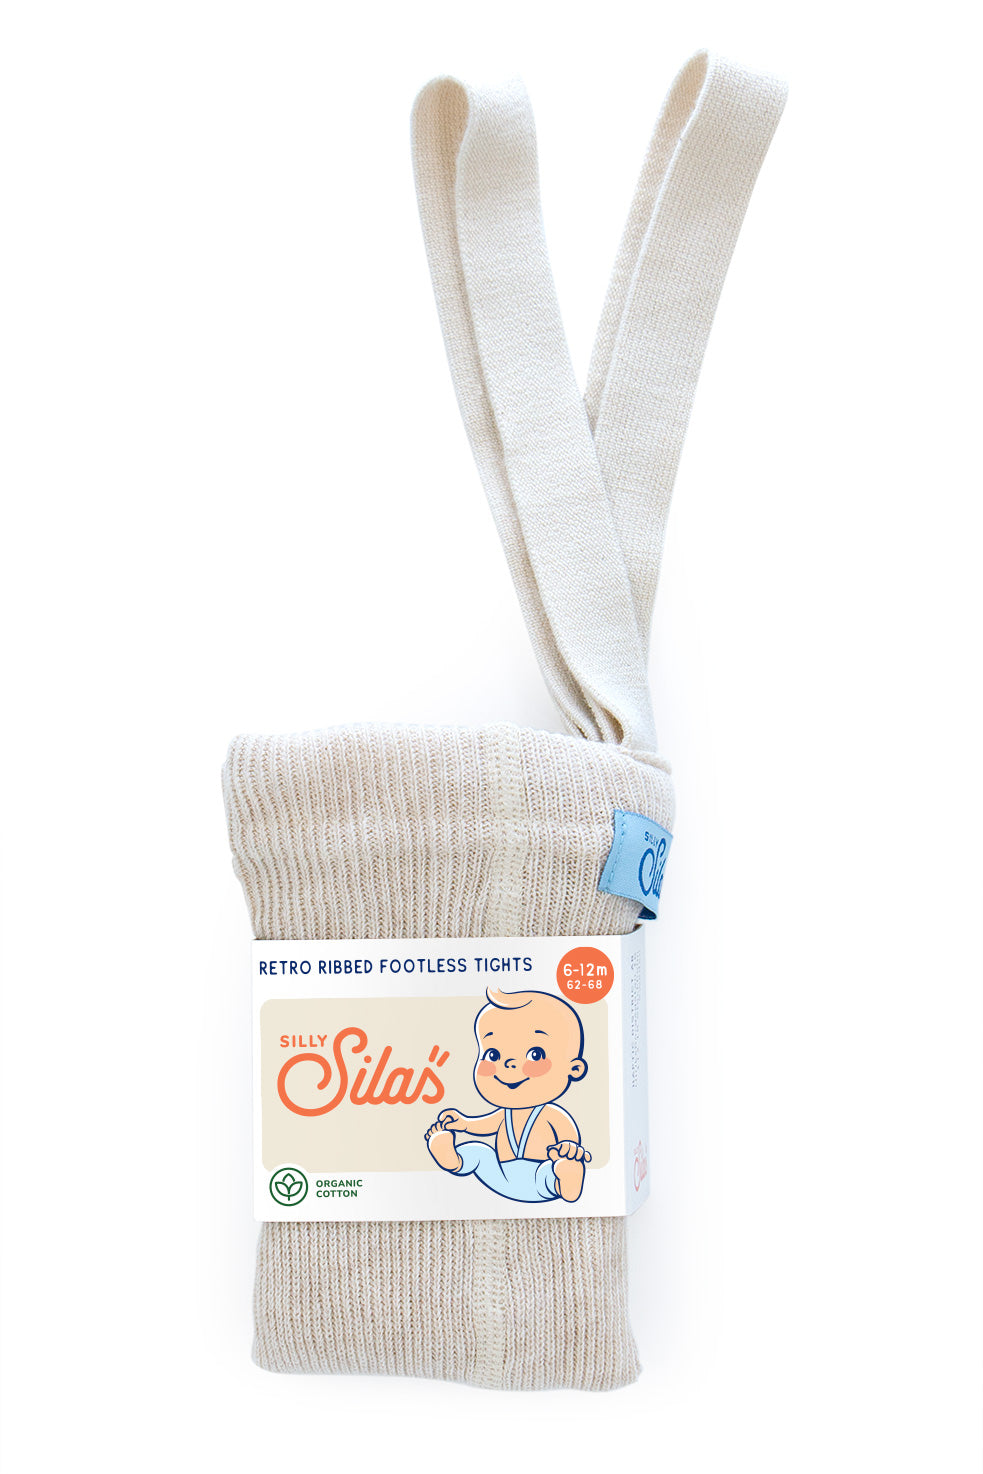 Silly Silas – About Baby Shop®